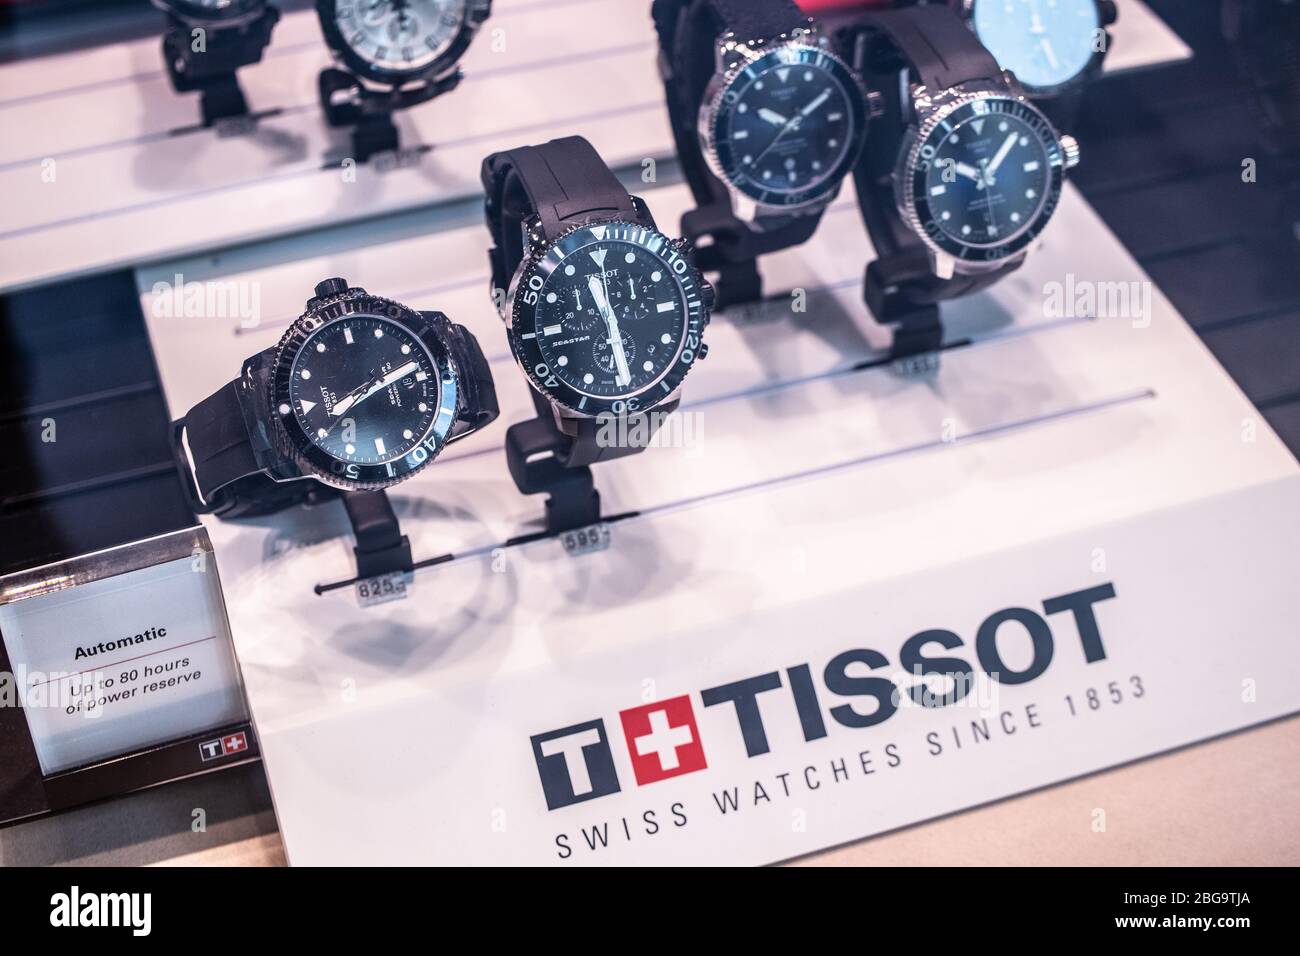 Tissot watch, window store with fashionable mechanical watches for sale, Tissot is a luxury Swiss watch manufacturer Stock Photo